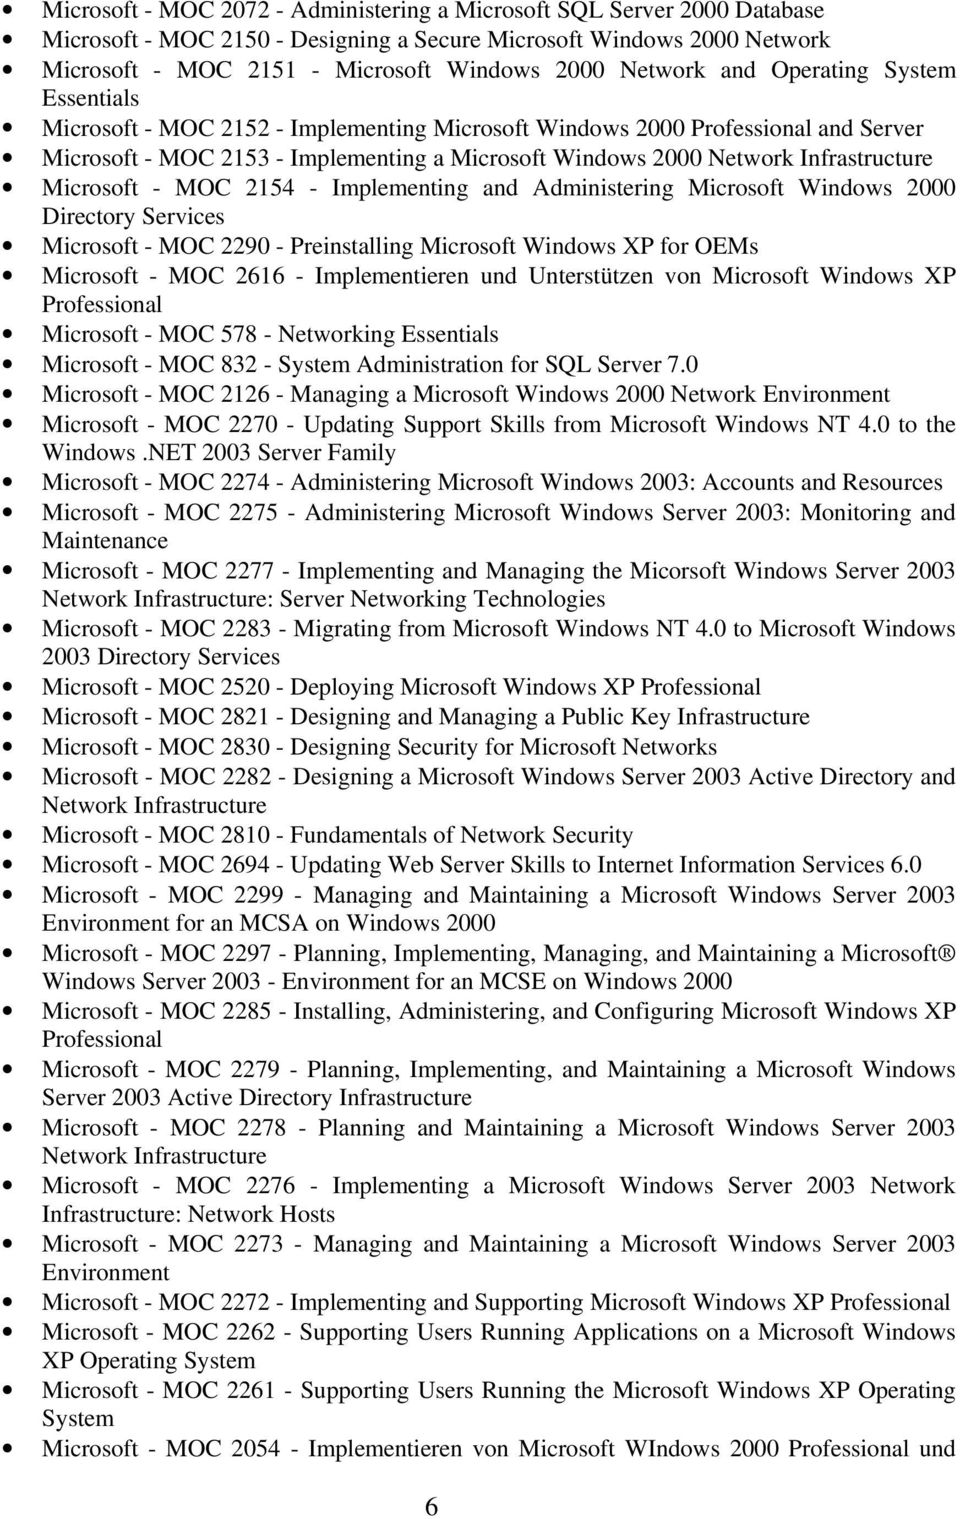 Infrastructure Microsoft - MOC 2154 - Implementing and Administering Microsoft Windows 2000 Directory Services Microsoft - MOC 2290 - Preinstalling Microsoft Windows XP for OEMs Microsoft - MOC 2616